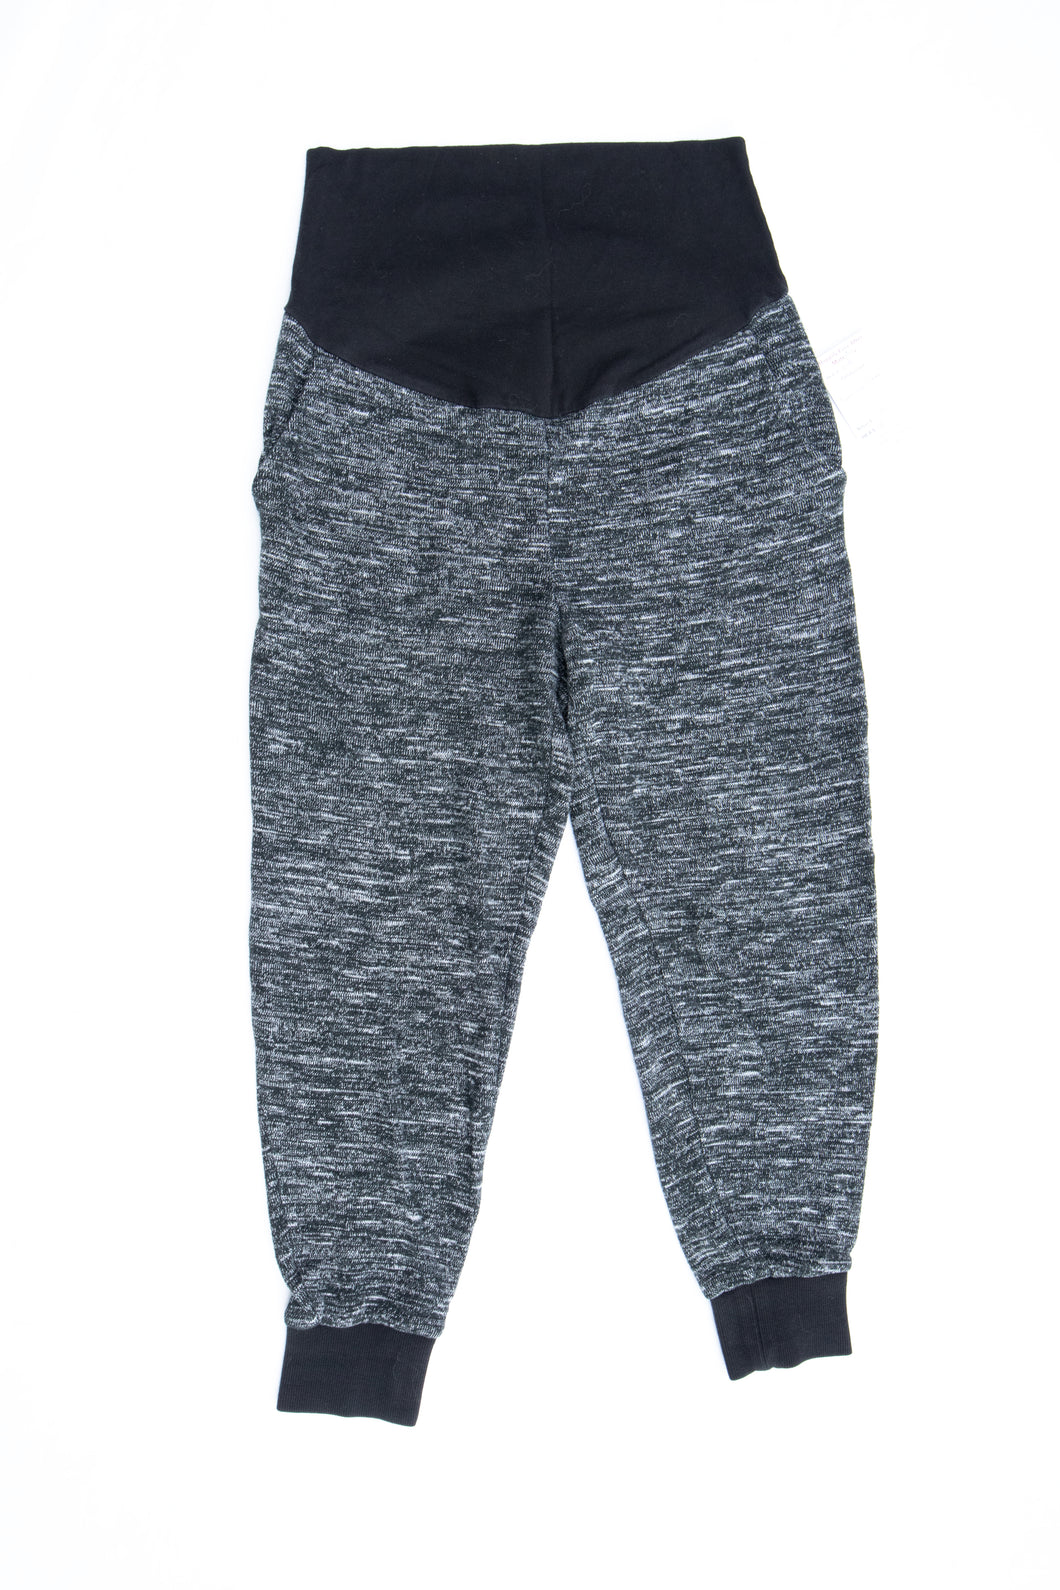 S Thyme Maternity Grey Joggers